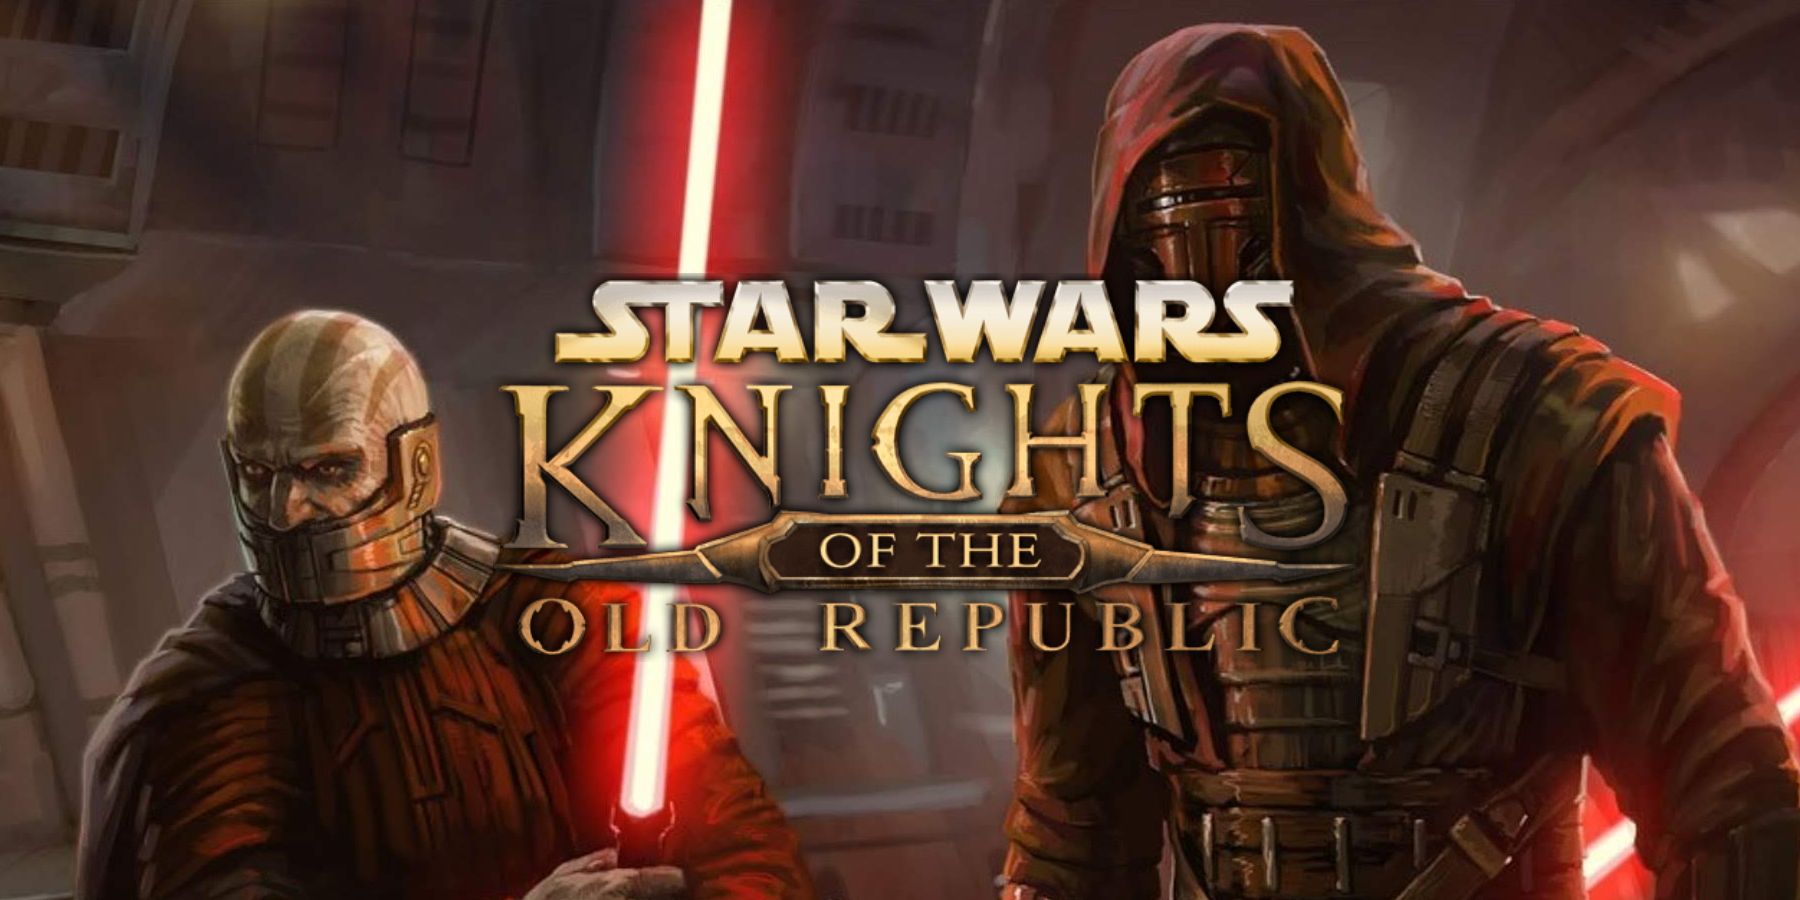 Star wars knights of the old republic русификатор для steam фото 37